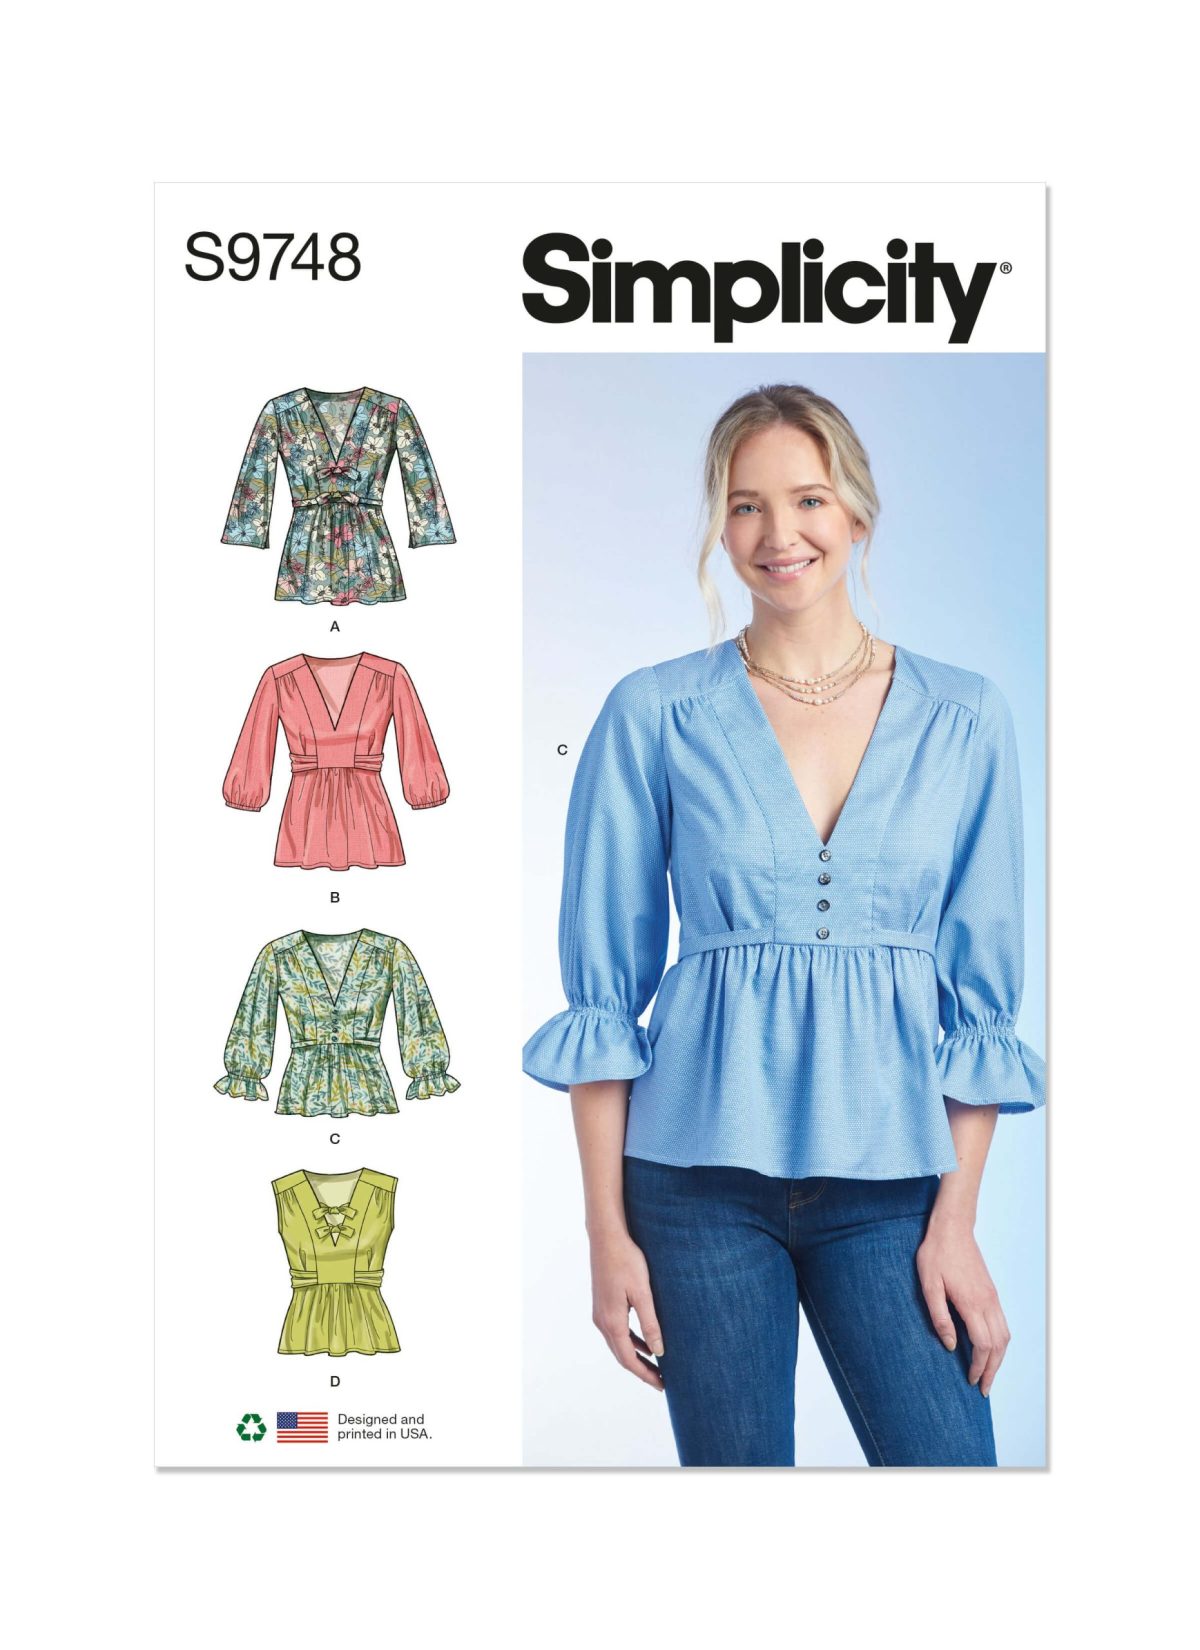 Simplicity Sewing Pattern S9748 Misses' Top with Sleeve Variations